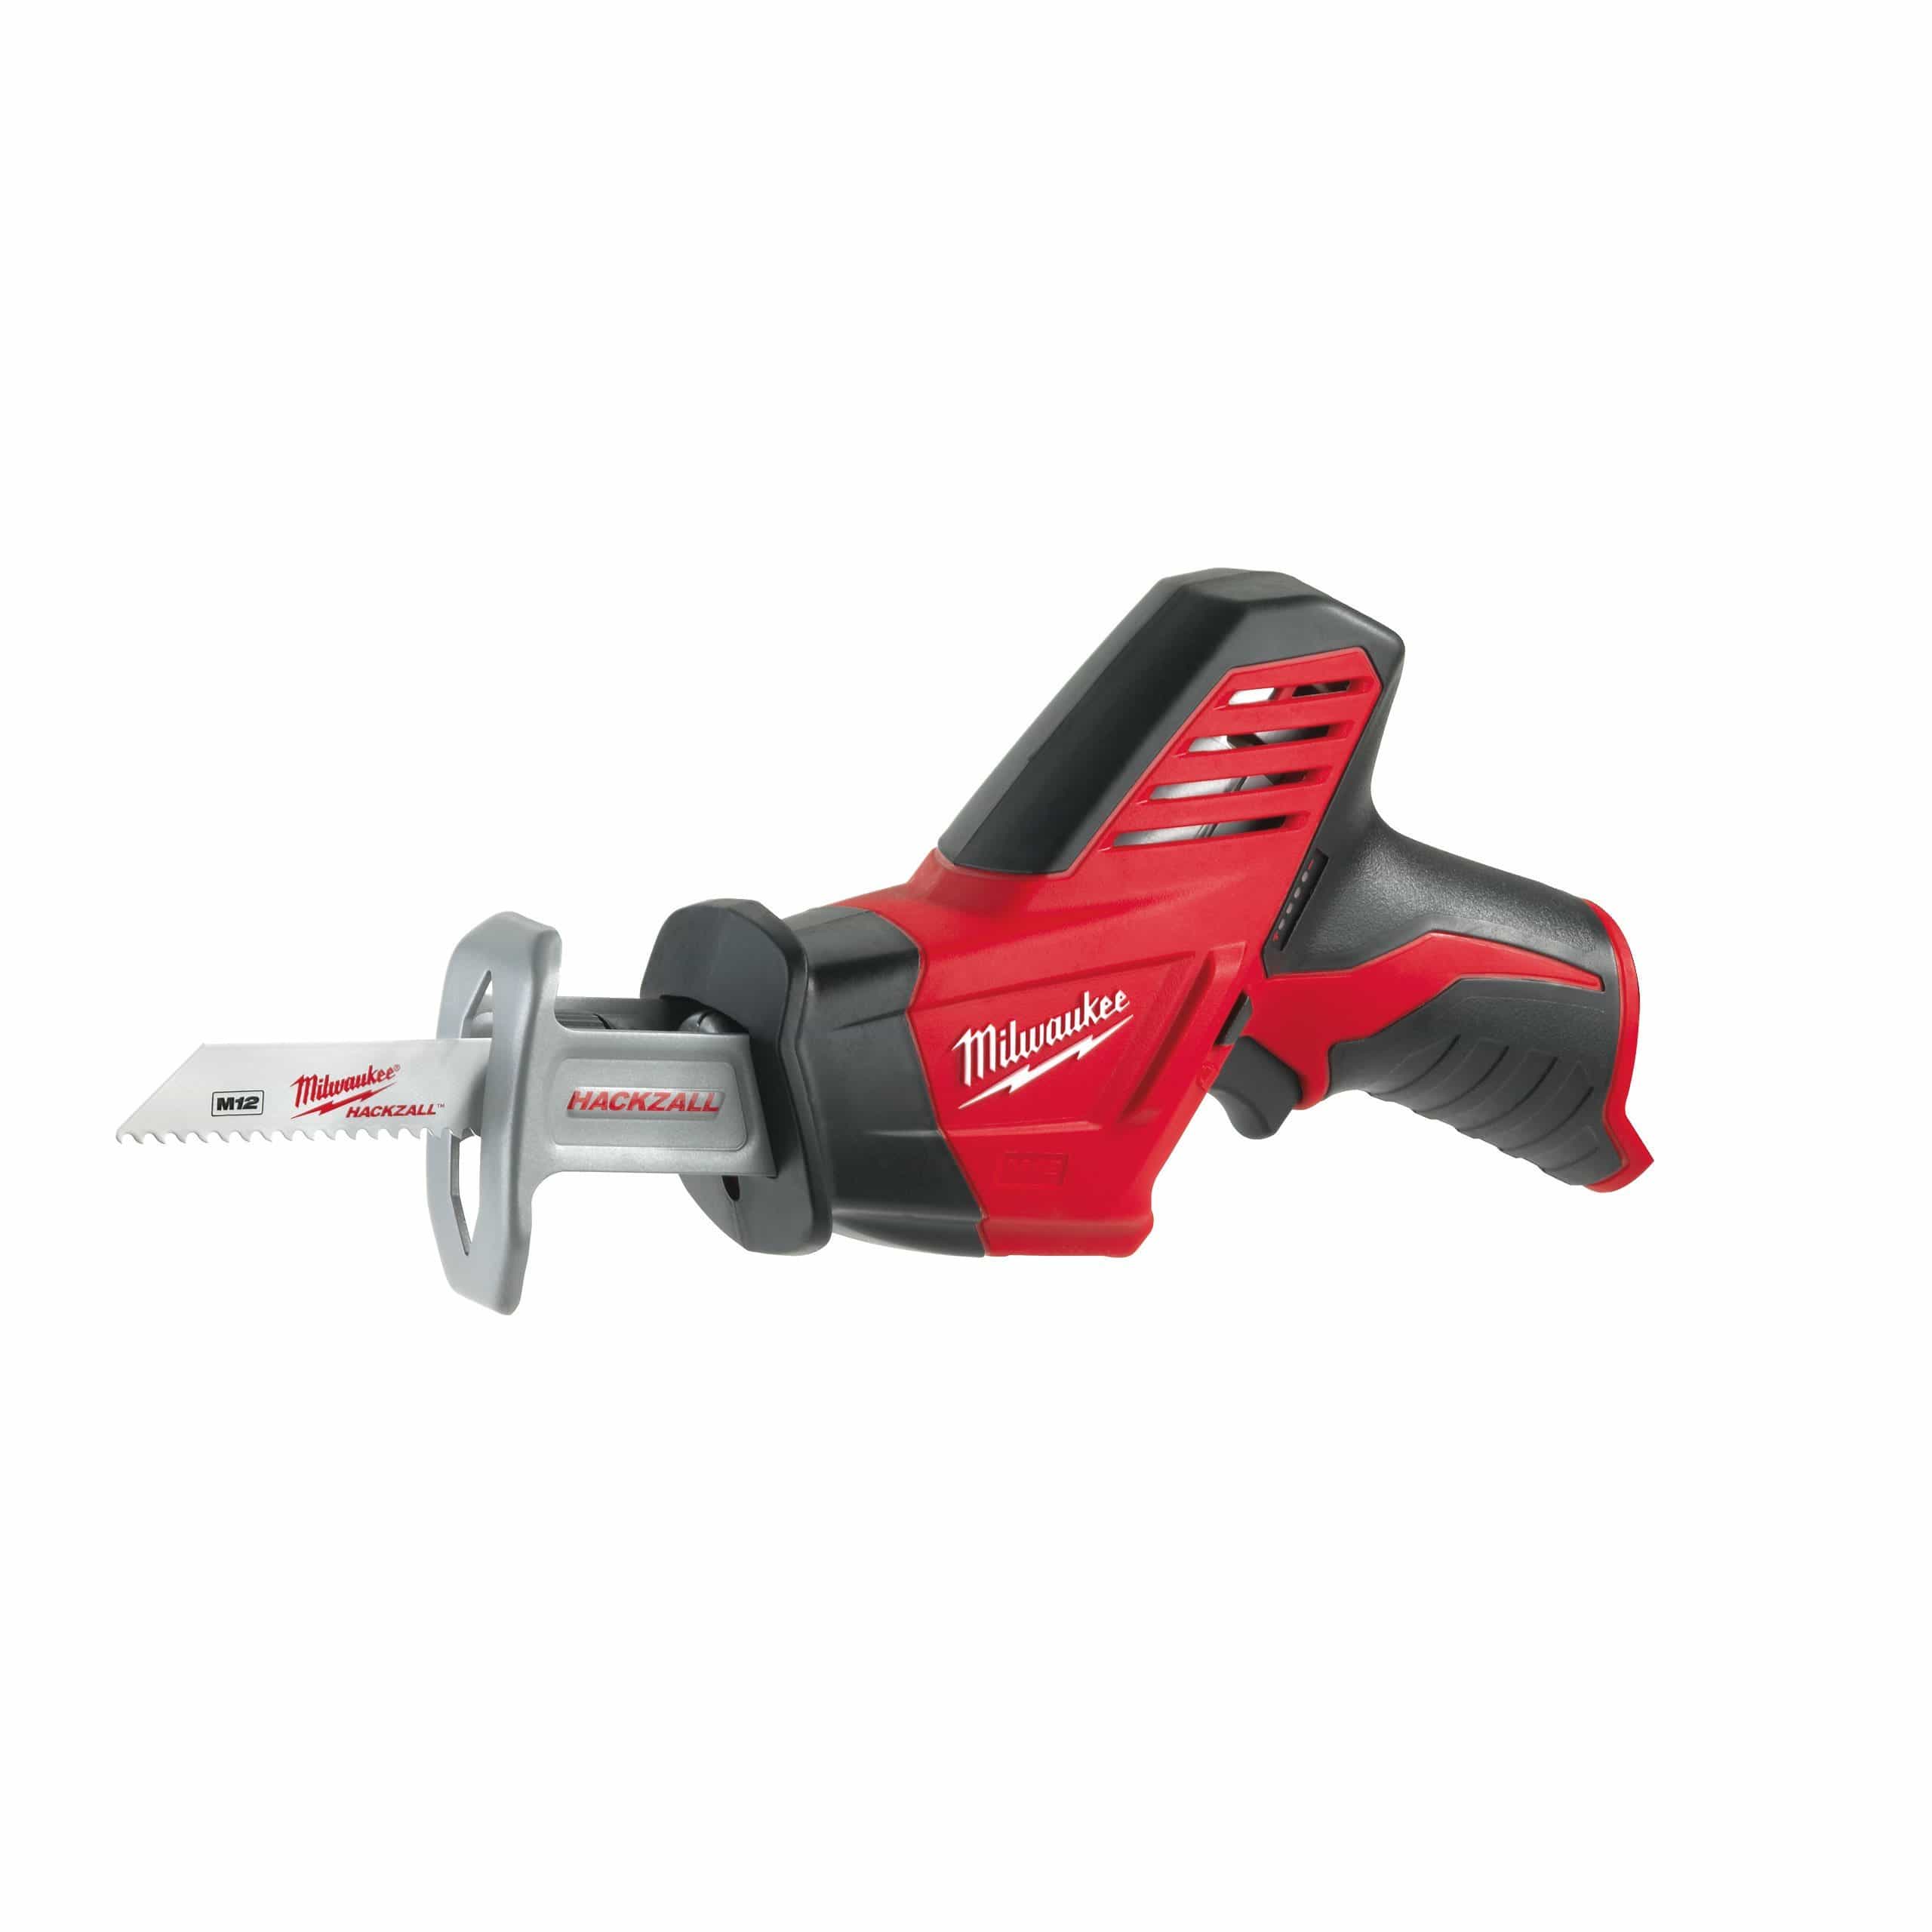 Milwaukee M12™ Cordless Sub Compact Hackzall Reciprocating Saw 12V - C12 HZ-0 | Supply Master | Accra, Ghana Tools Building Steel Engineering Hardware tool